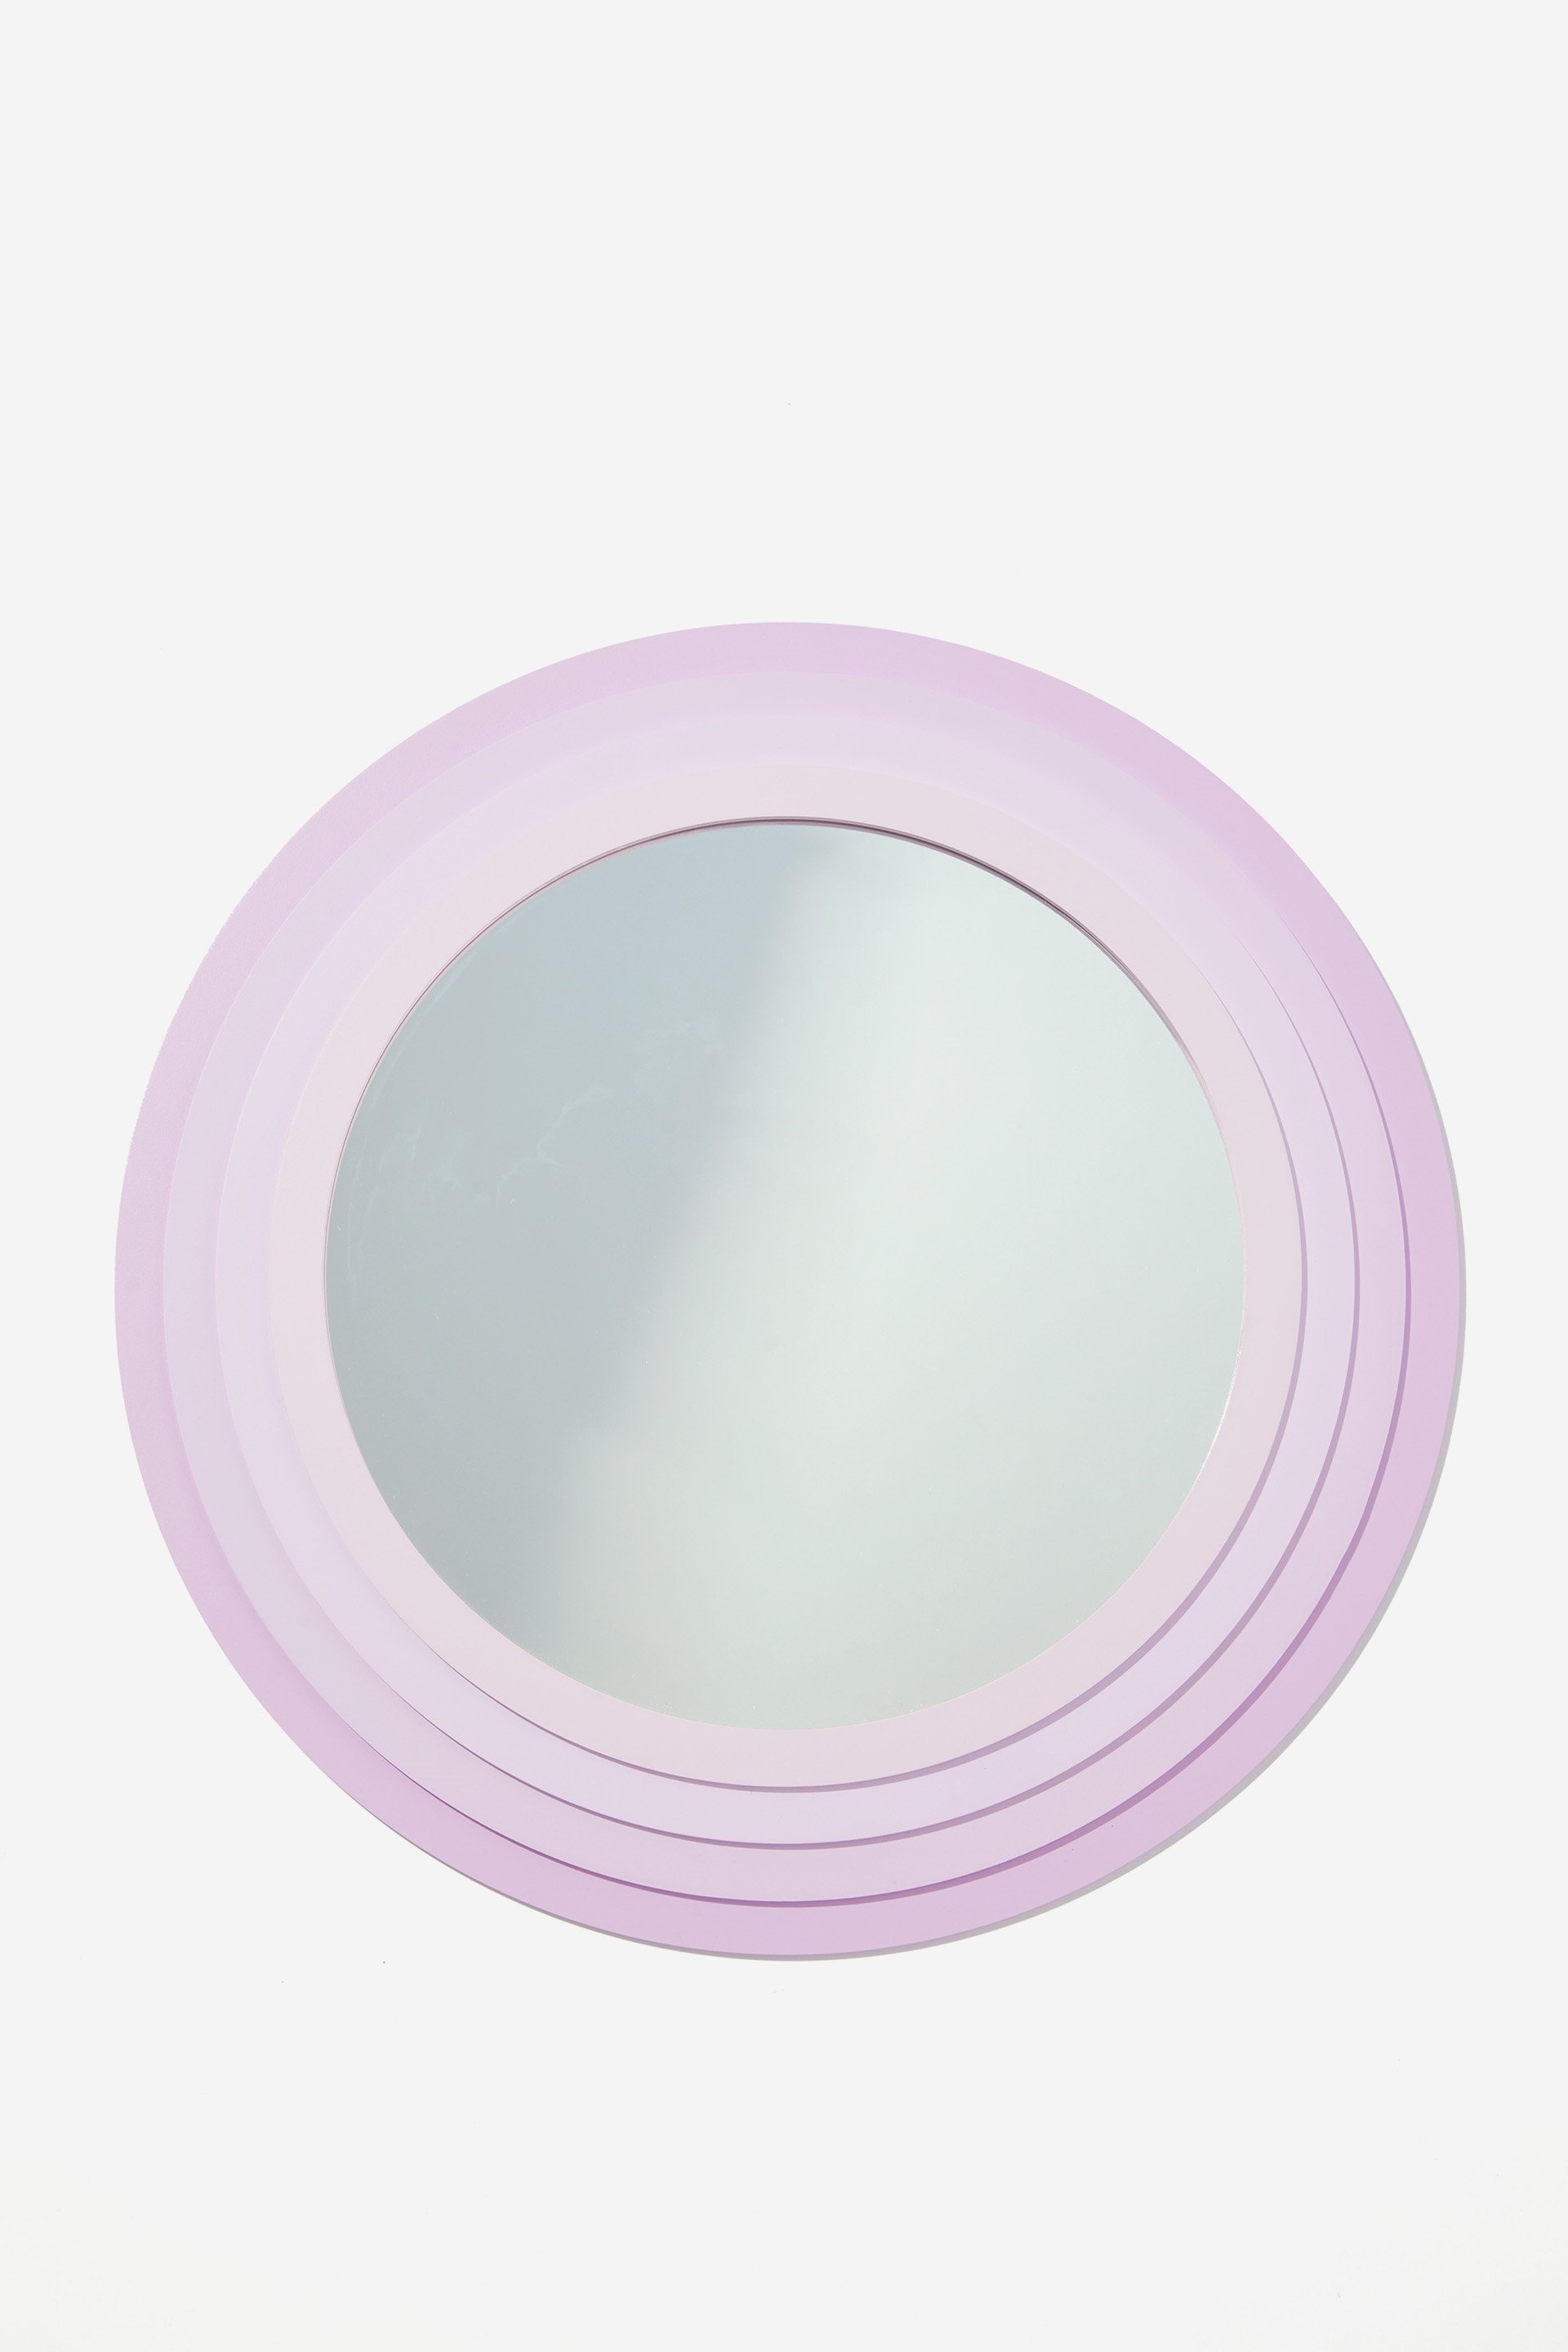 Typo - Shaped Wall Mirror - Round pale lavender